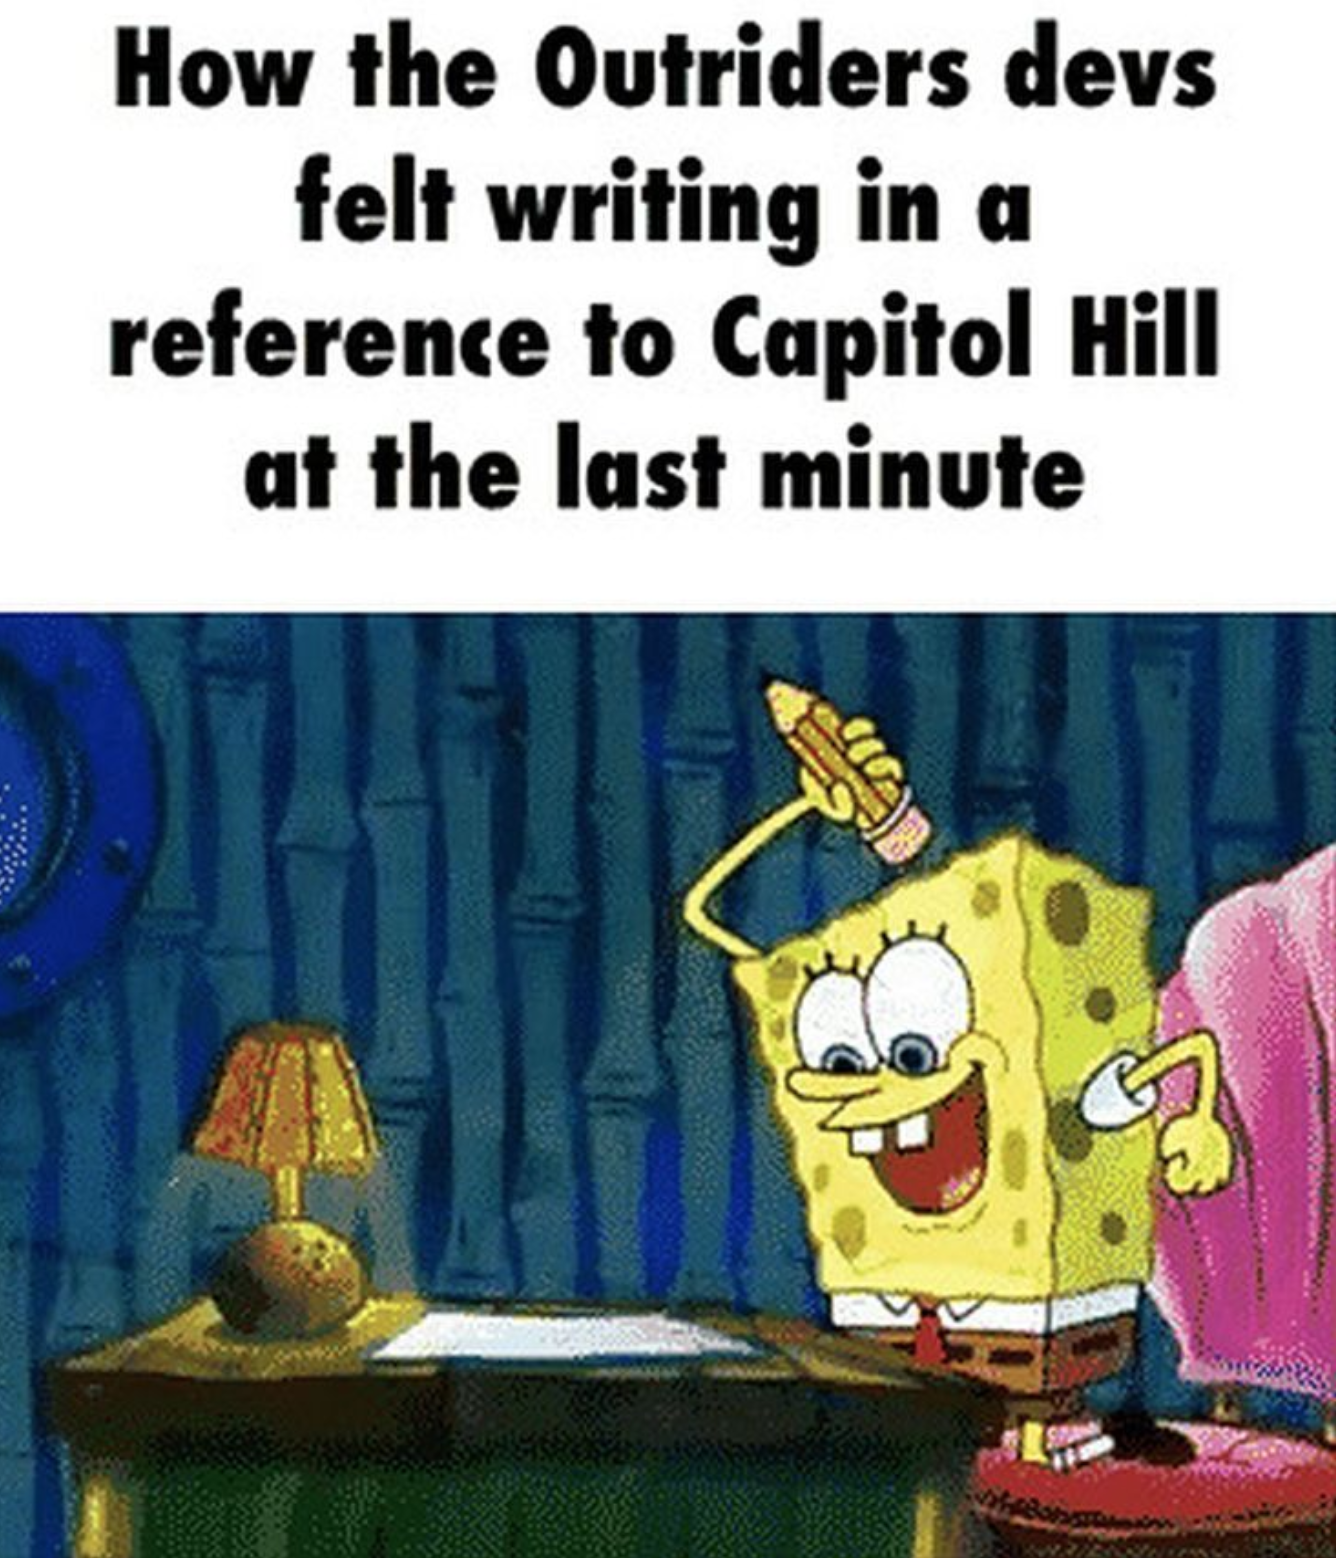 Outriders Memes - cartoon - How the Outriders devs felt writing in a reference to Capitol Hill at the last minute